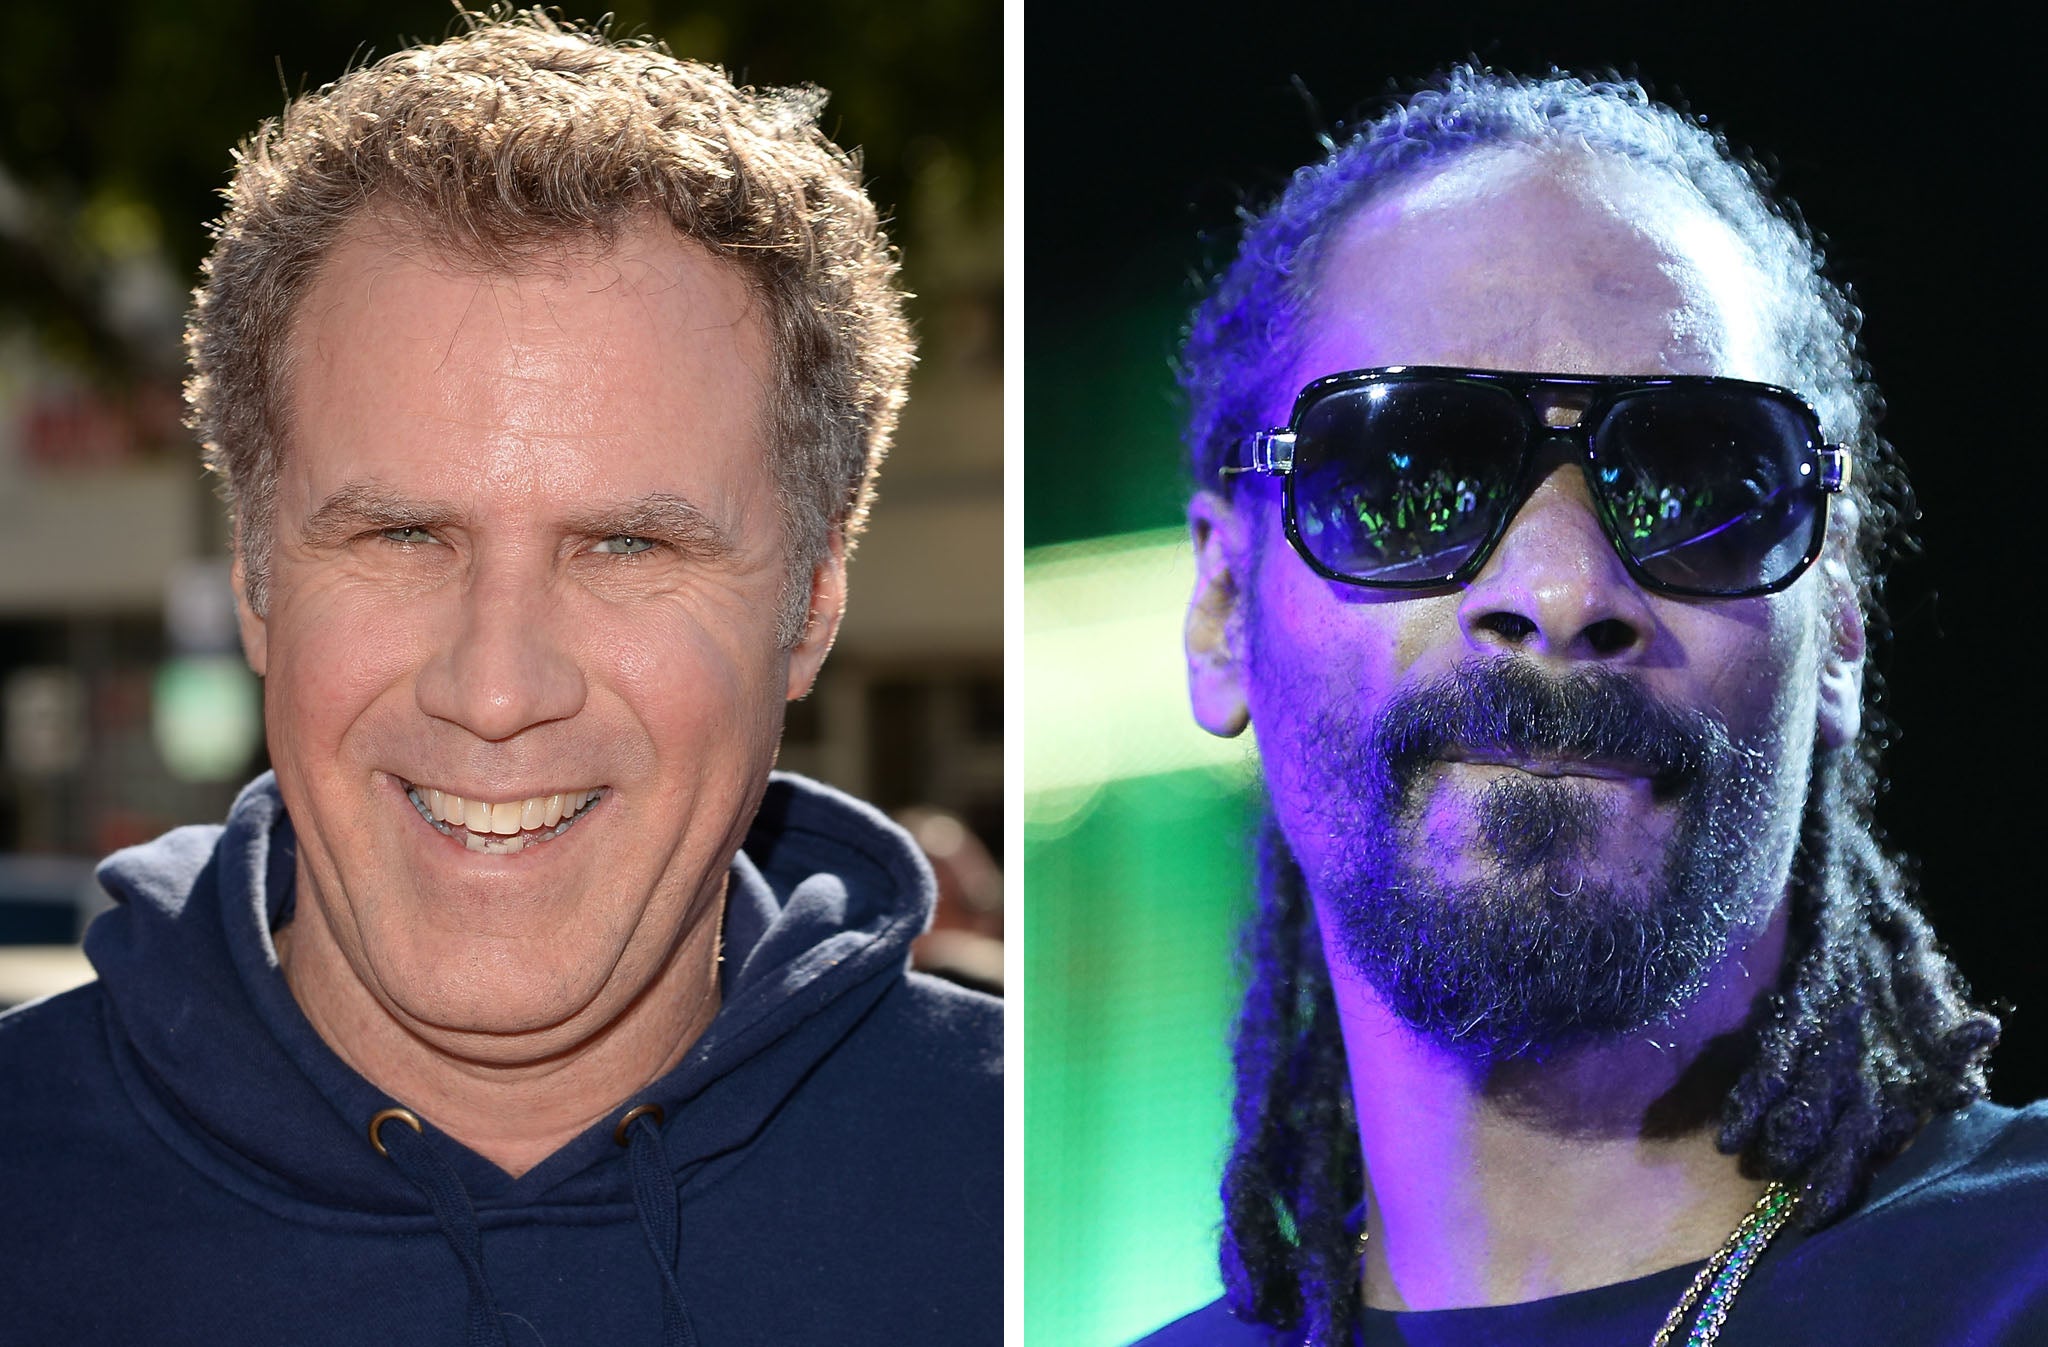 Will Ferrells Reddit AMA gatecrashed by Snoop Dogg demanding cowbells The Independent The Independent